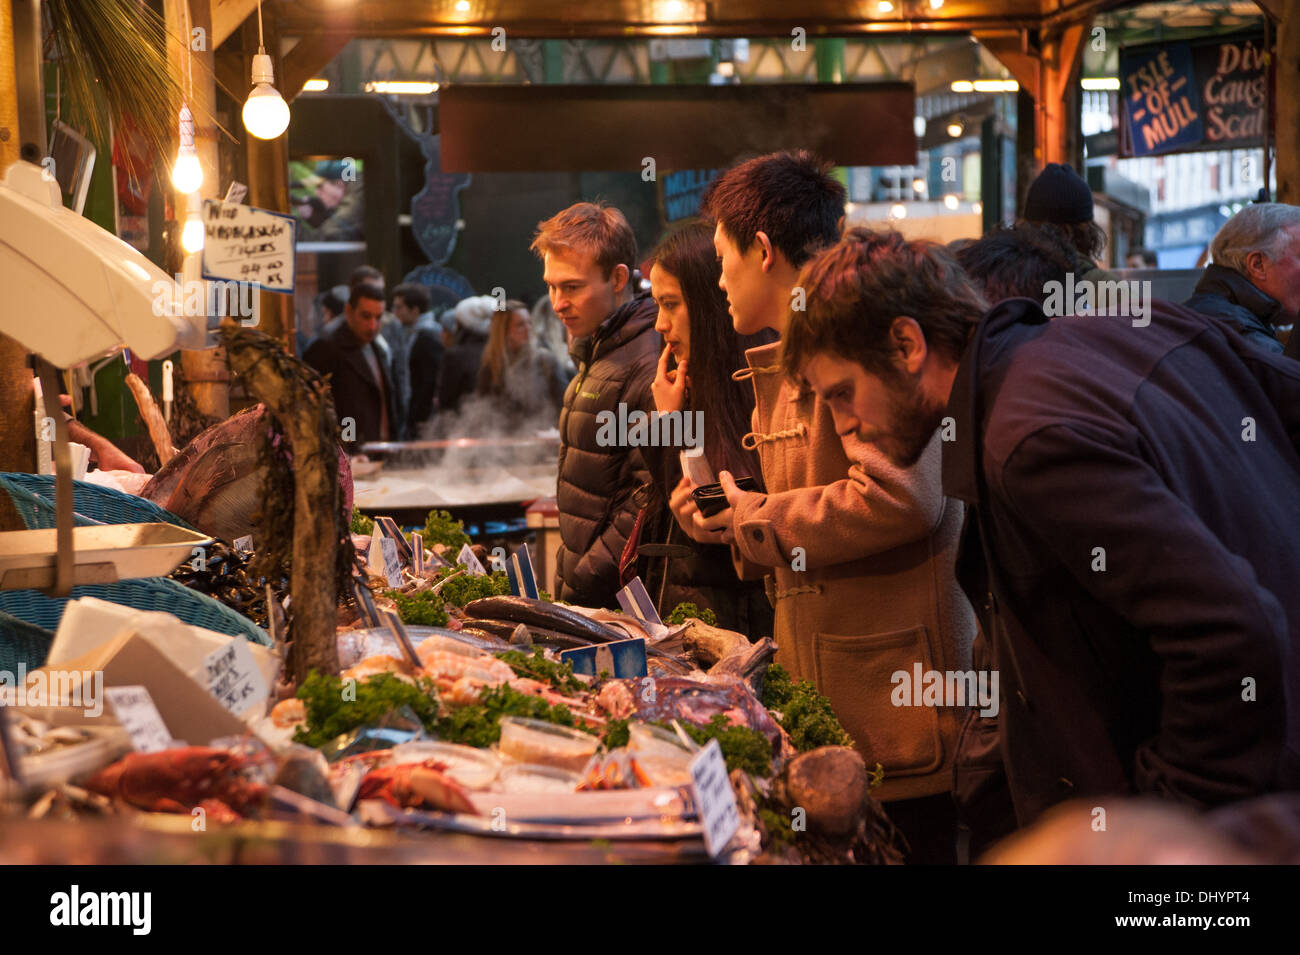 People shopping at busy wet fish stall in Borough Market Southwark London SE1 UK Stock Photo